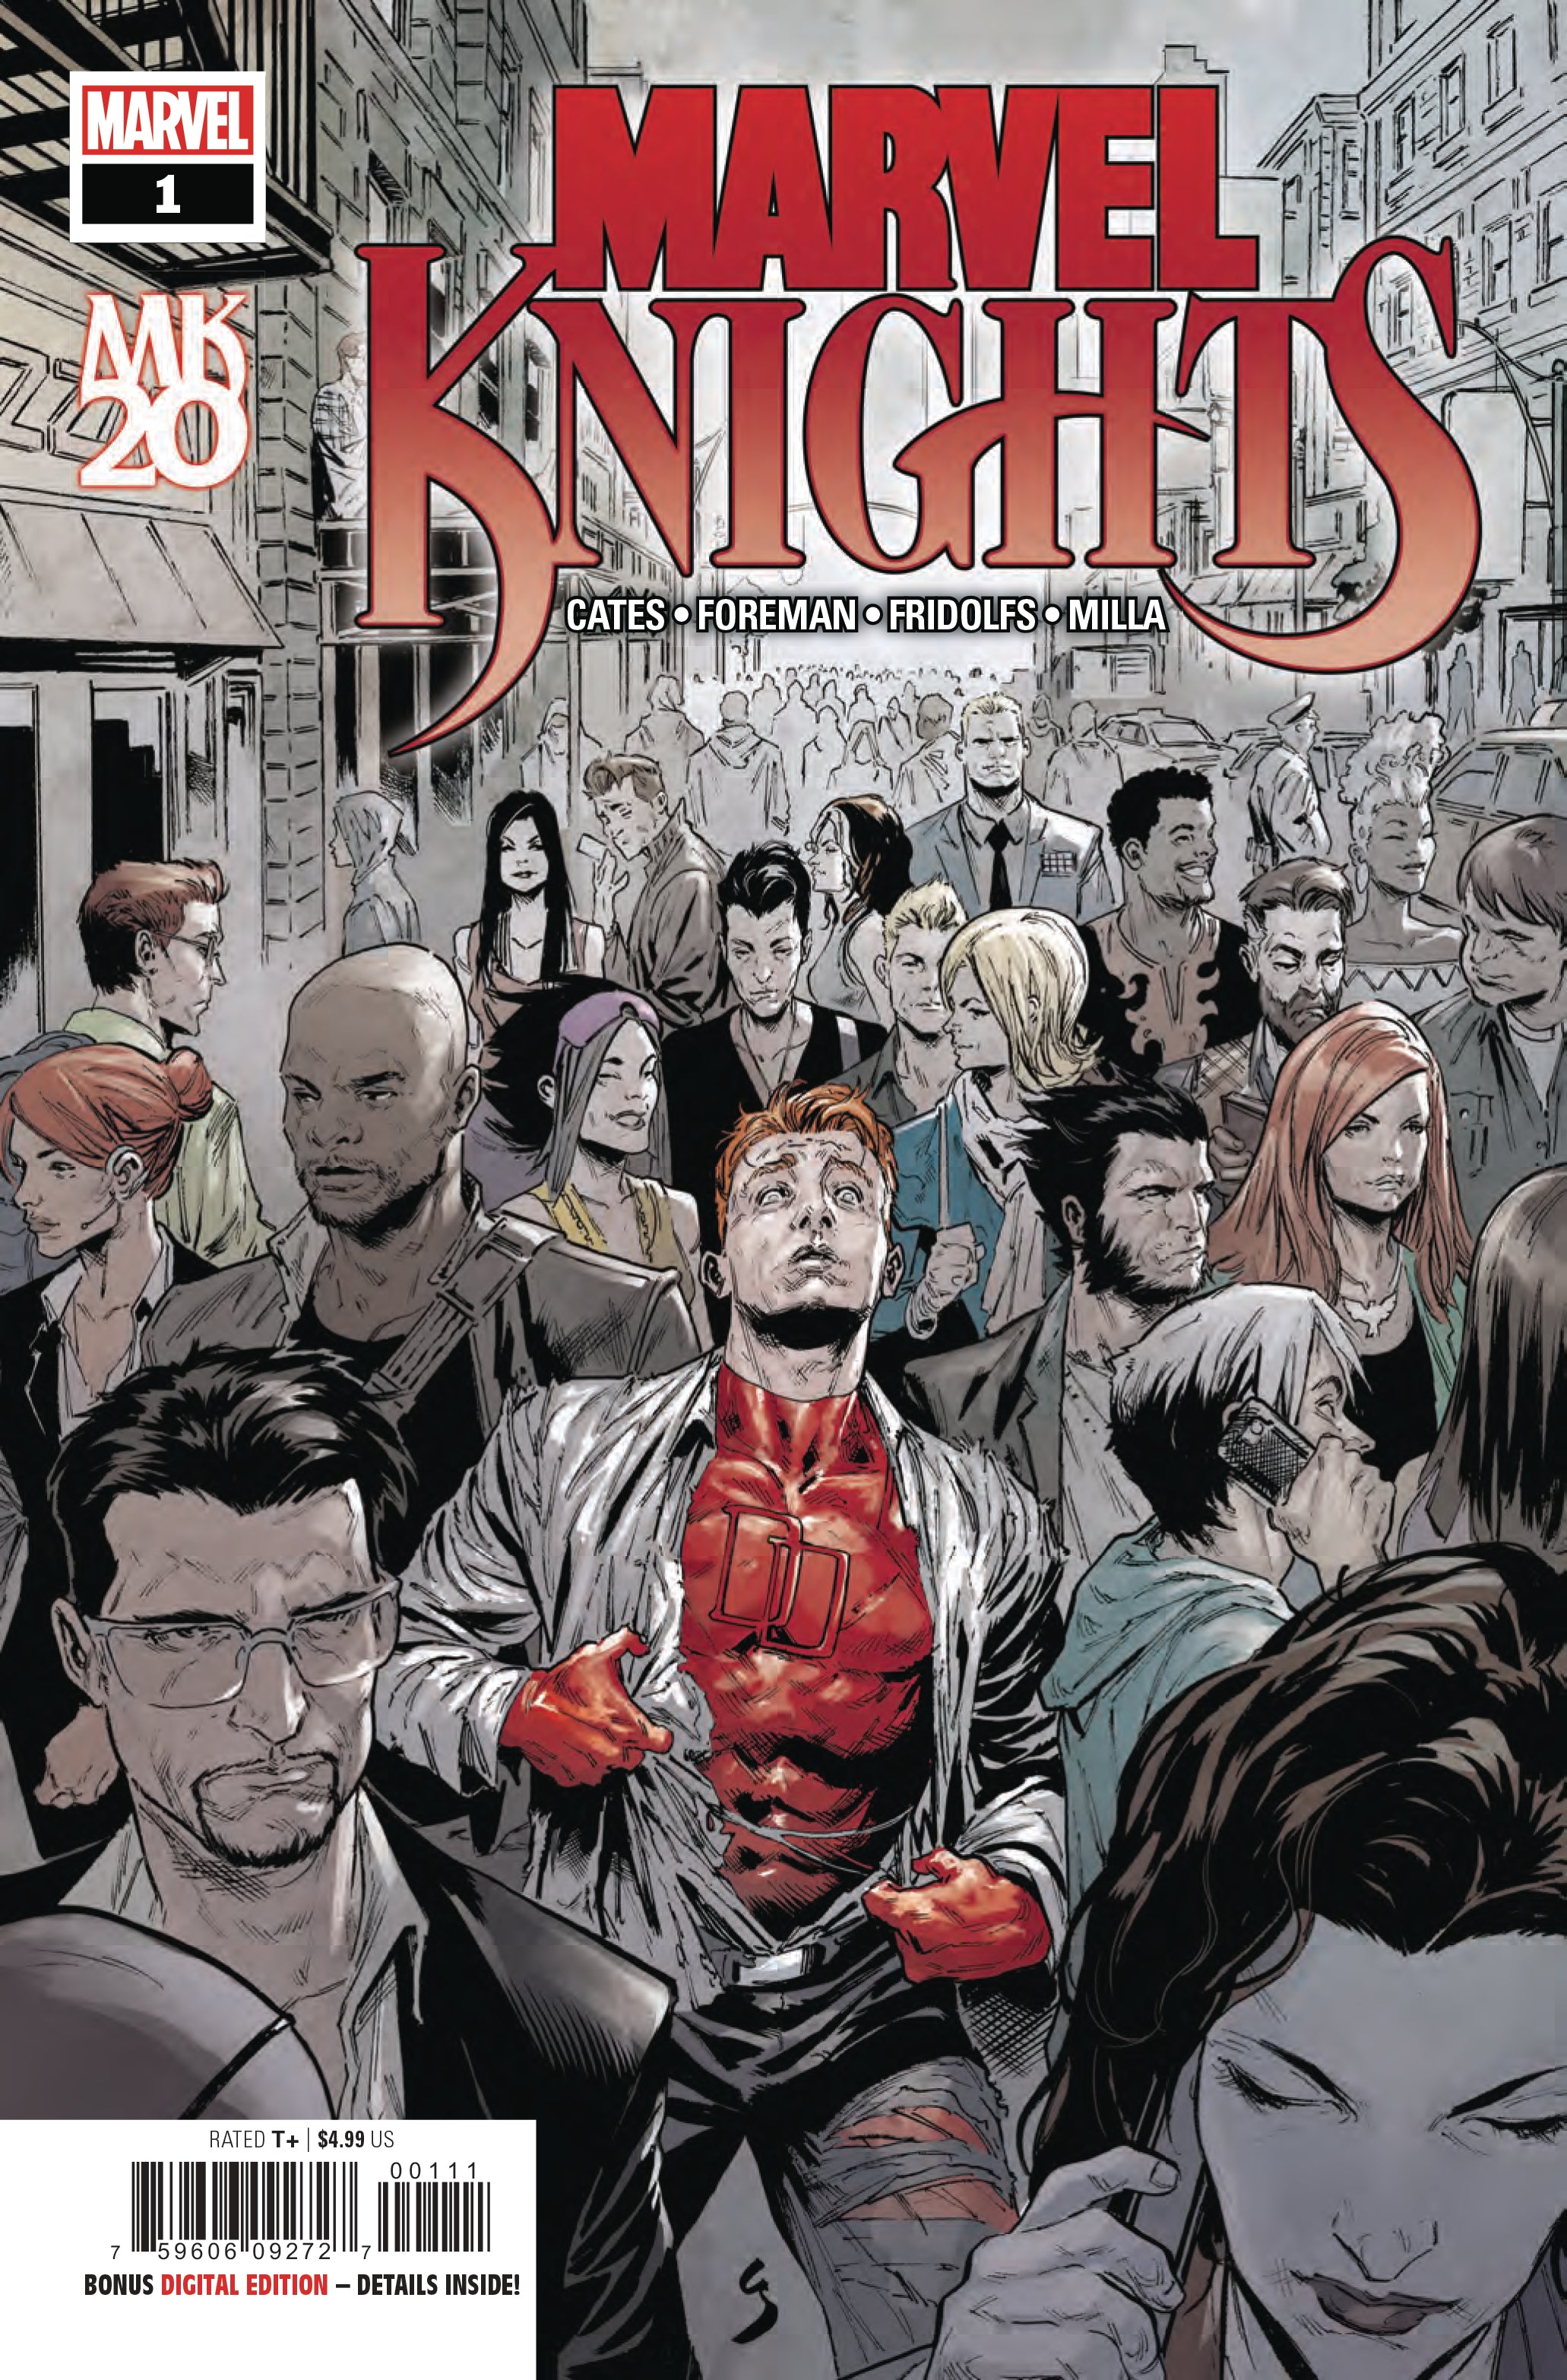 Marvel Knights 20th #1 (Of 6) | BD Cosmos